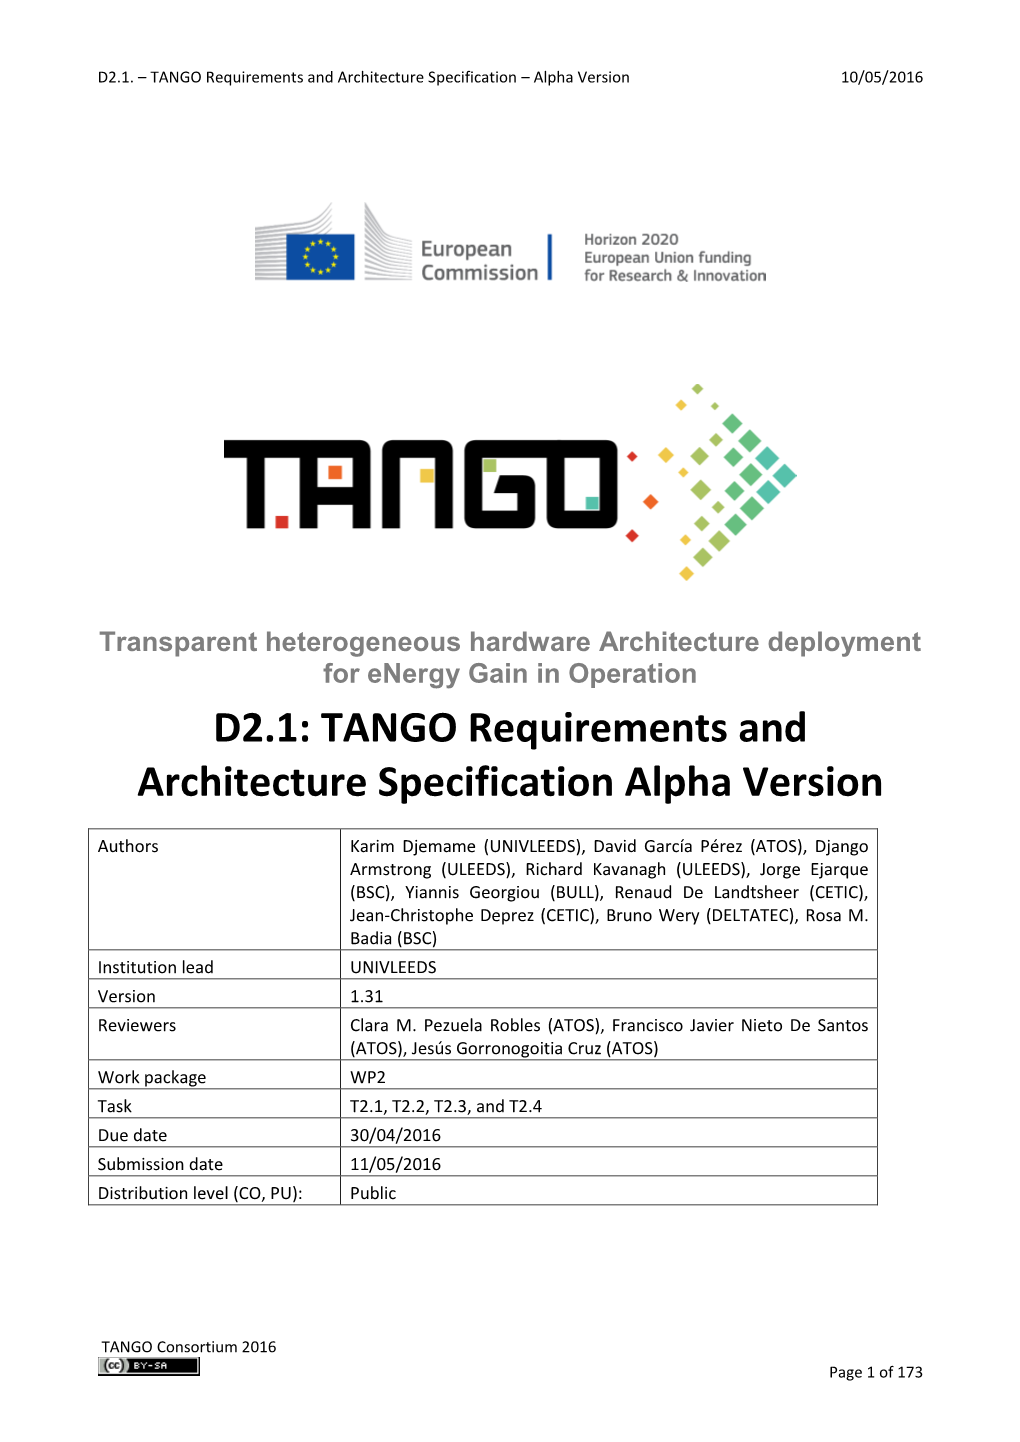 D2.1: TANGO Requirements and Architecture Specification Alpha